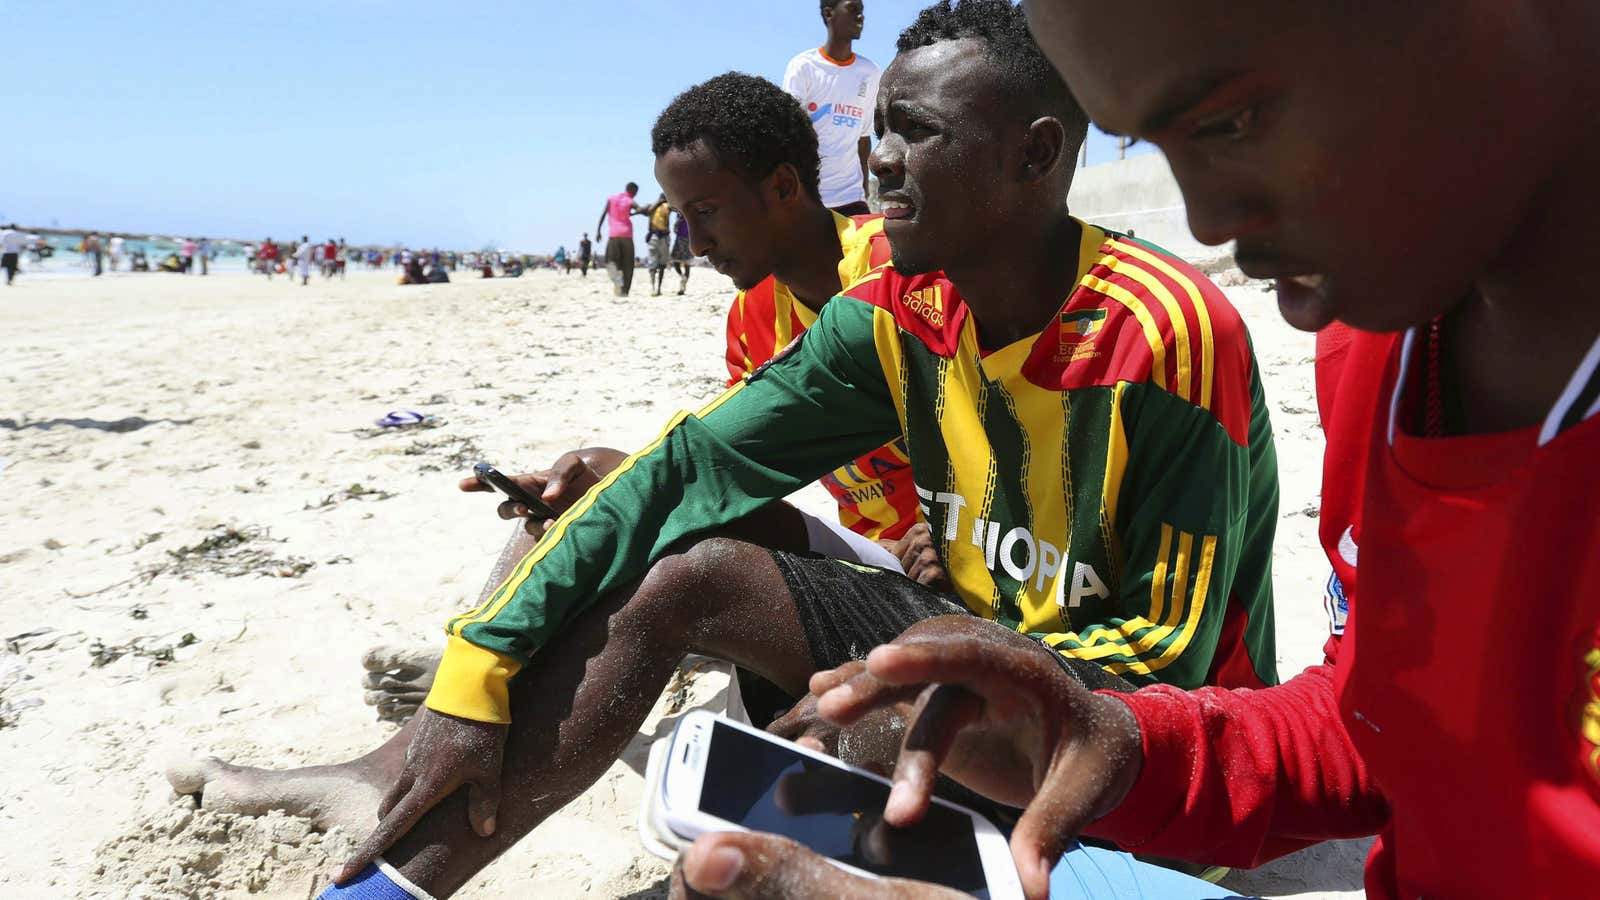 Africans are facing restrictions online